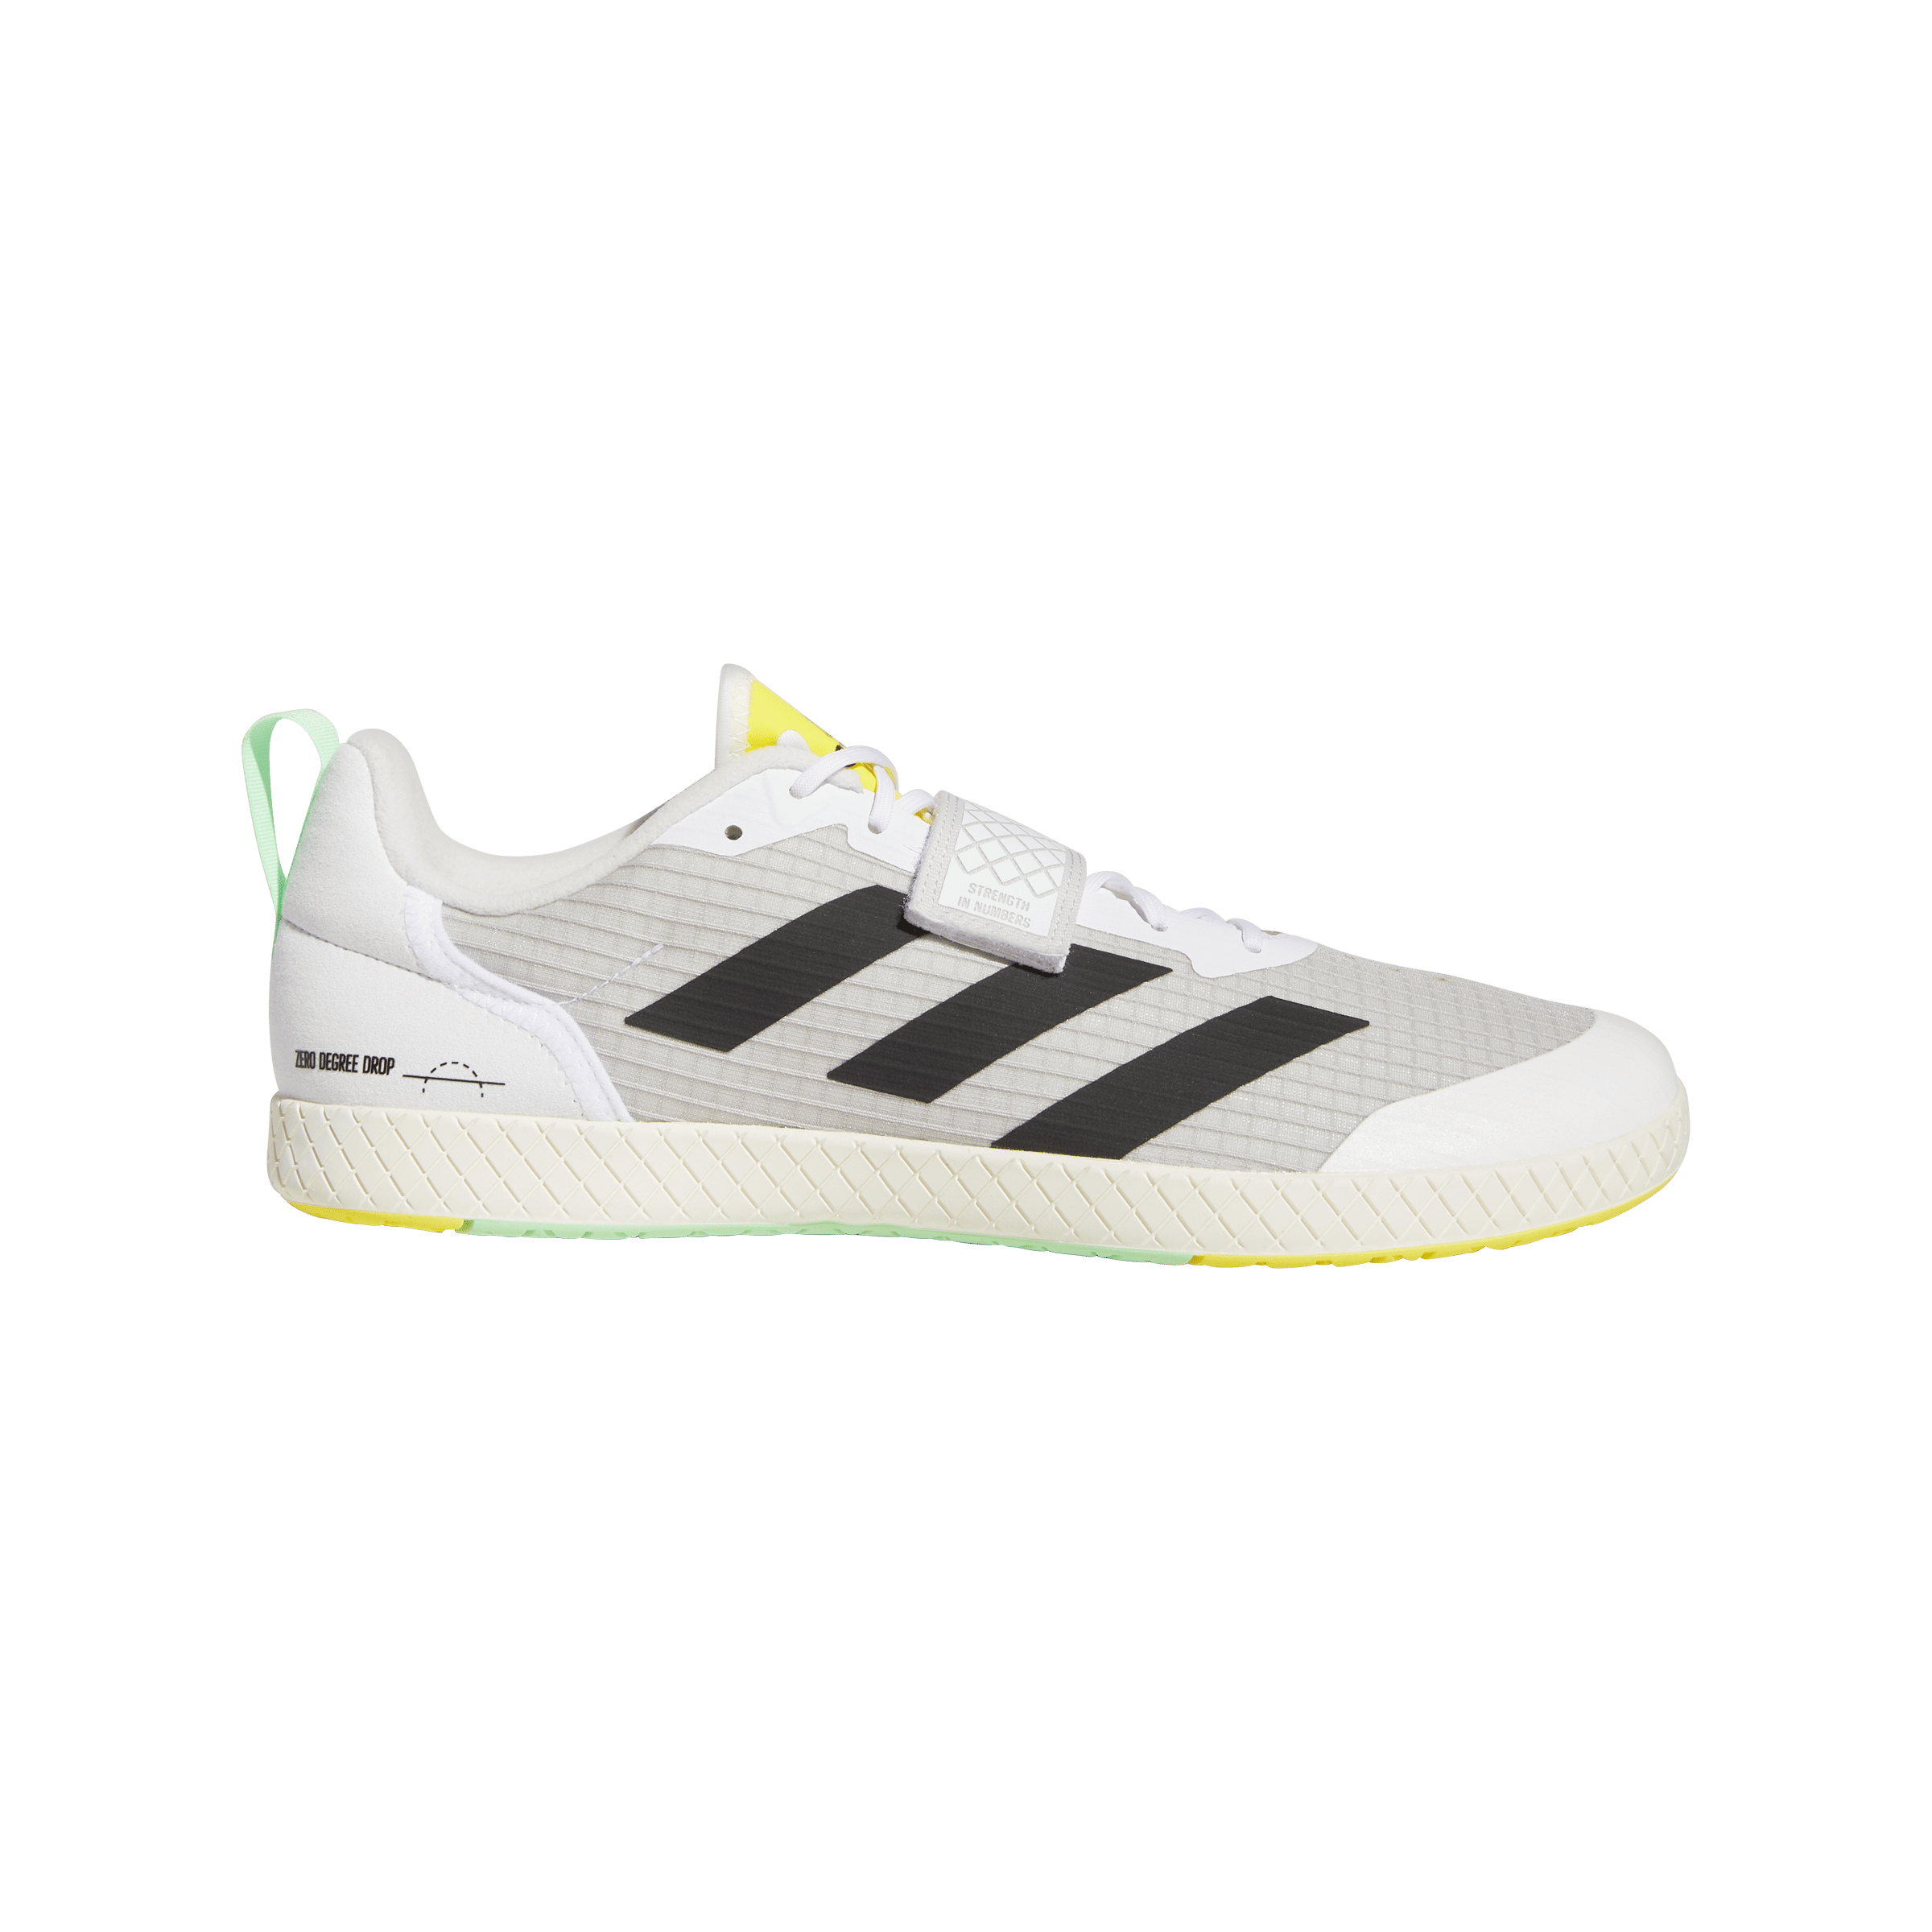 Adidas The Total Lifting Shoes in White